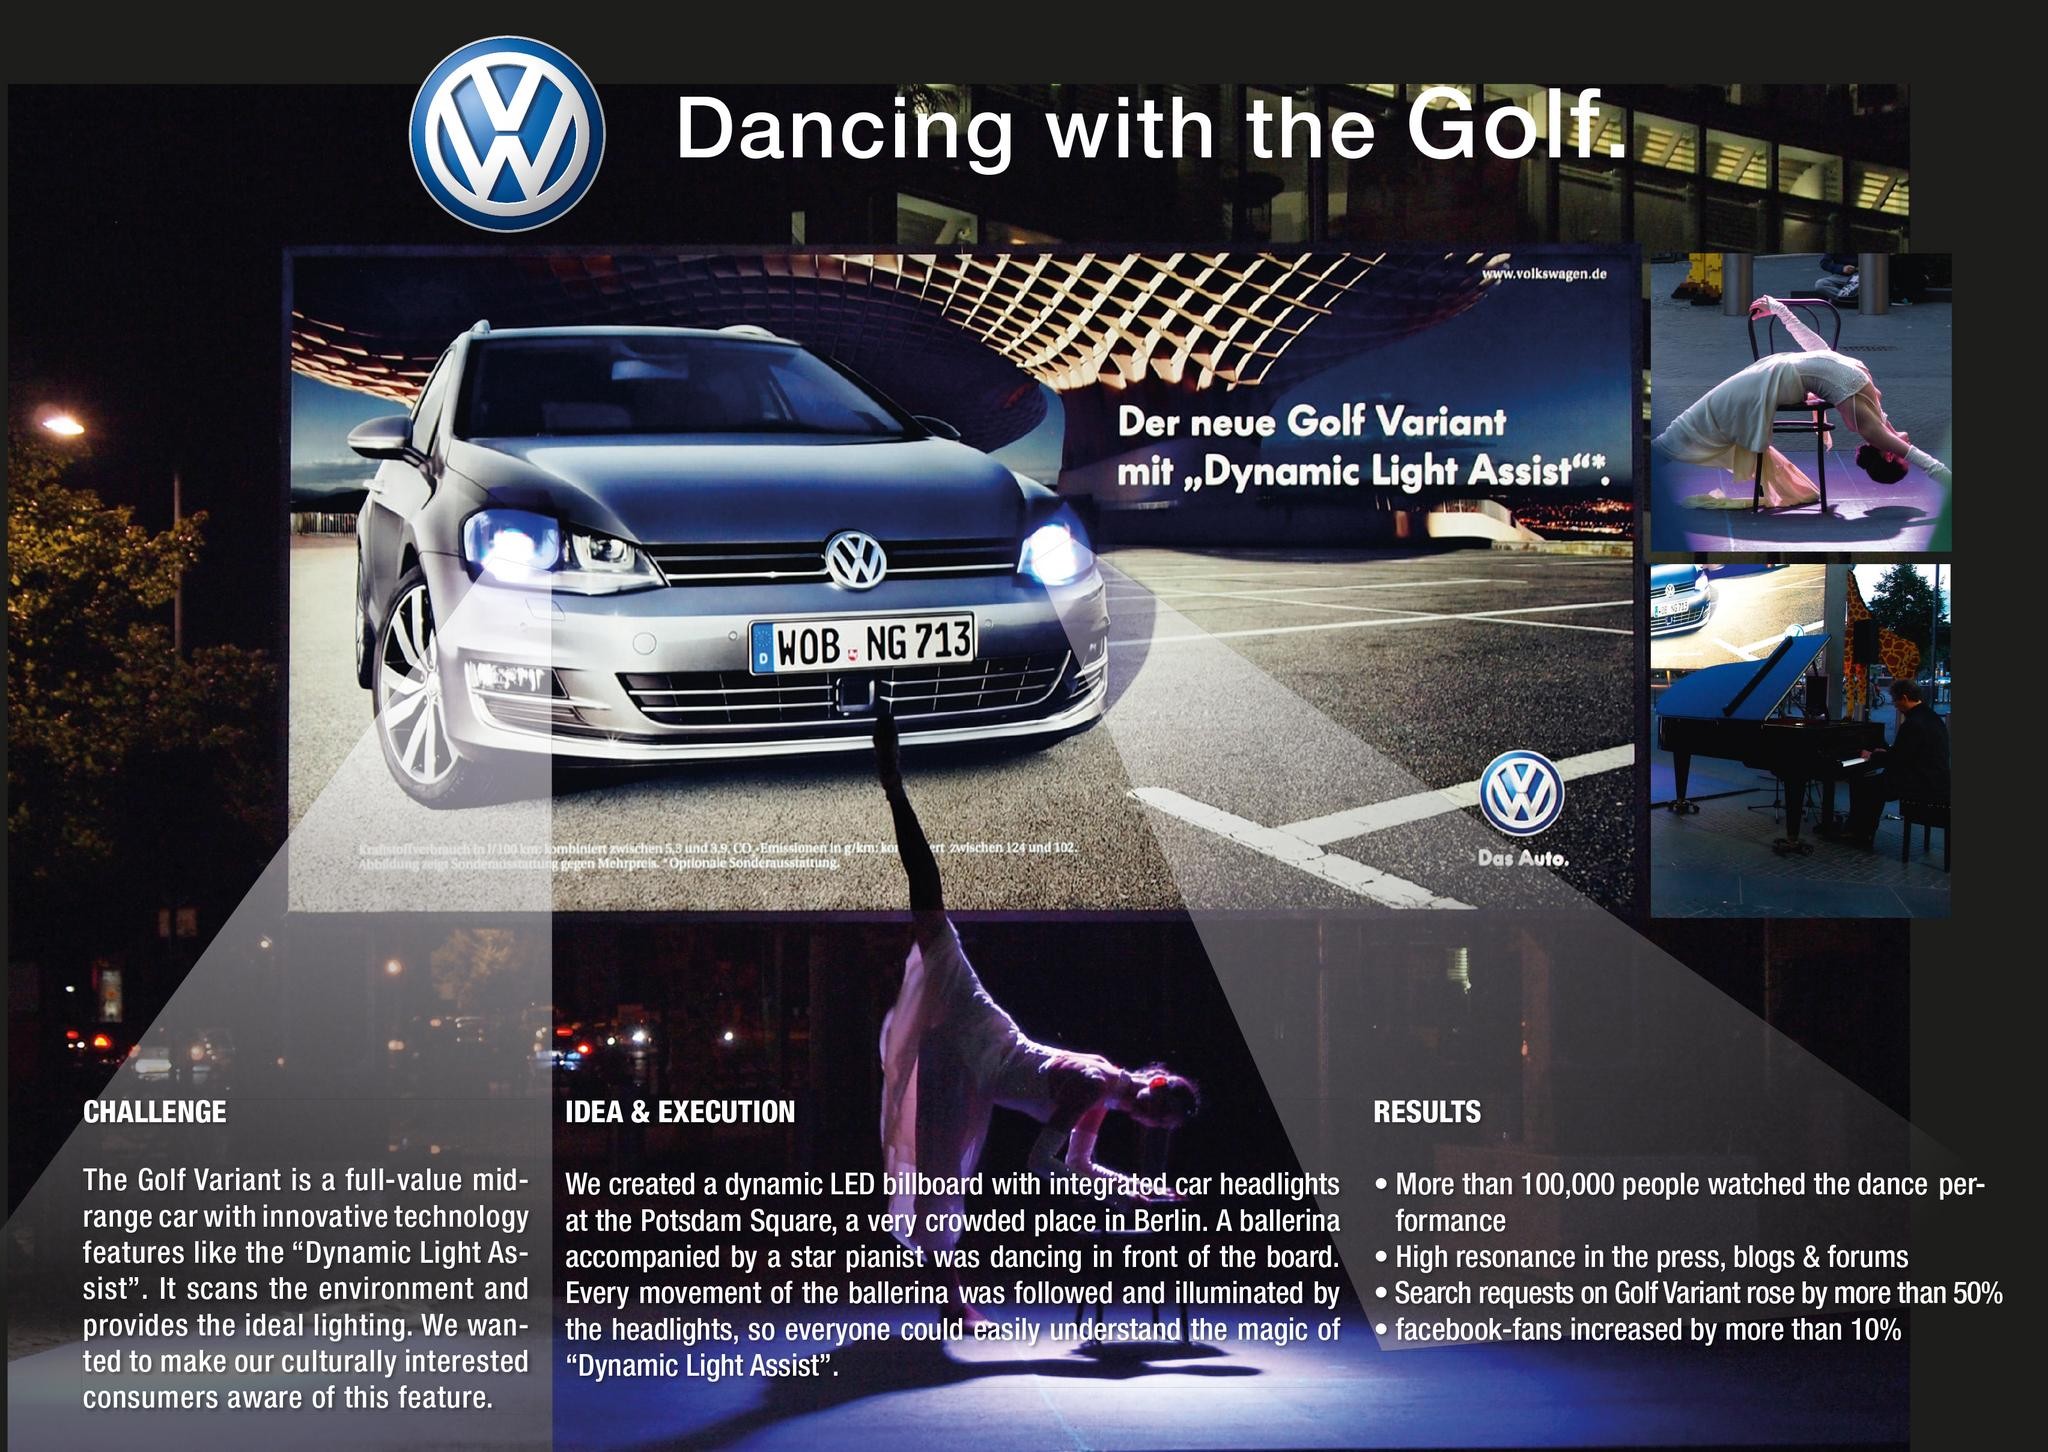 GOLF VARIANT – DANCING WITH THE GOLF